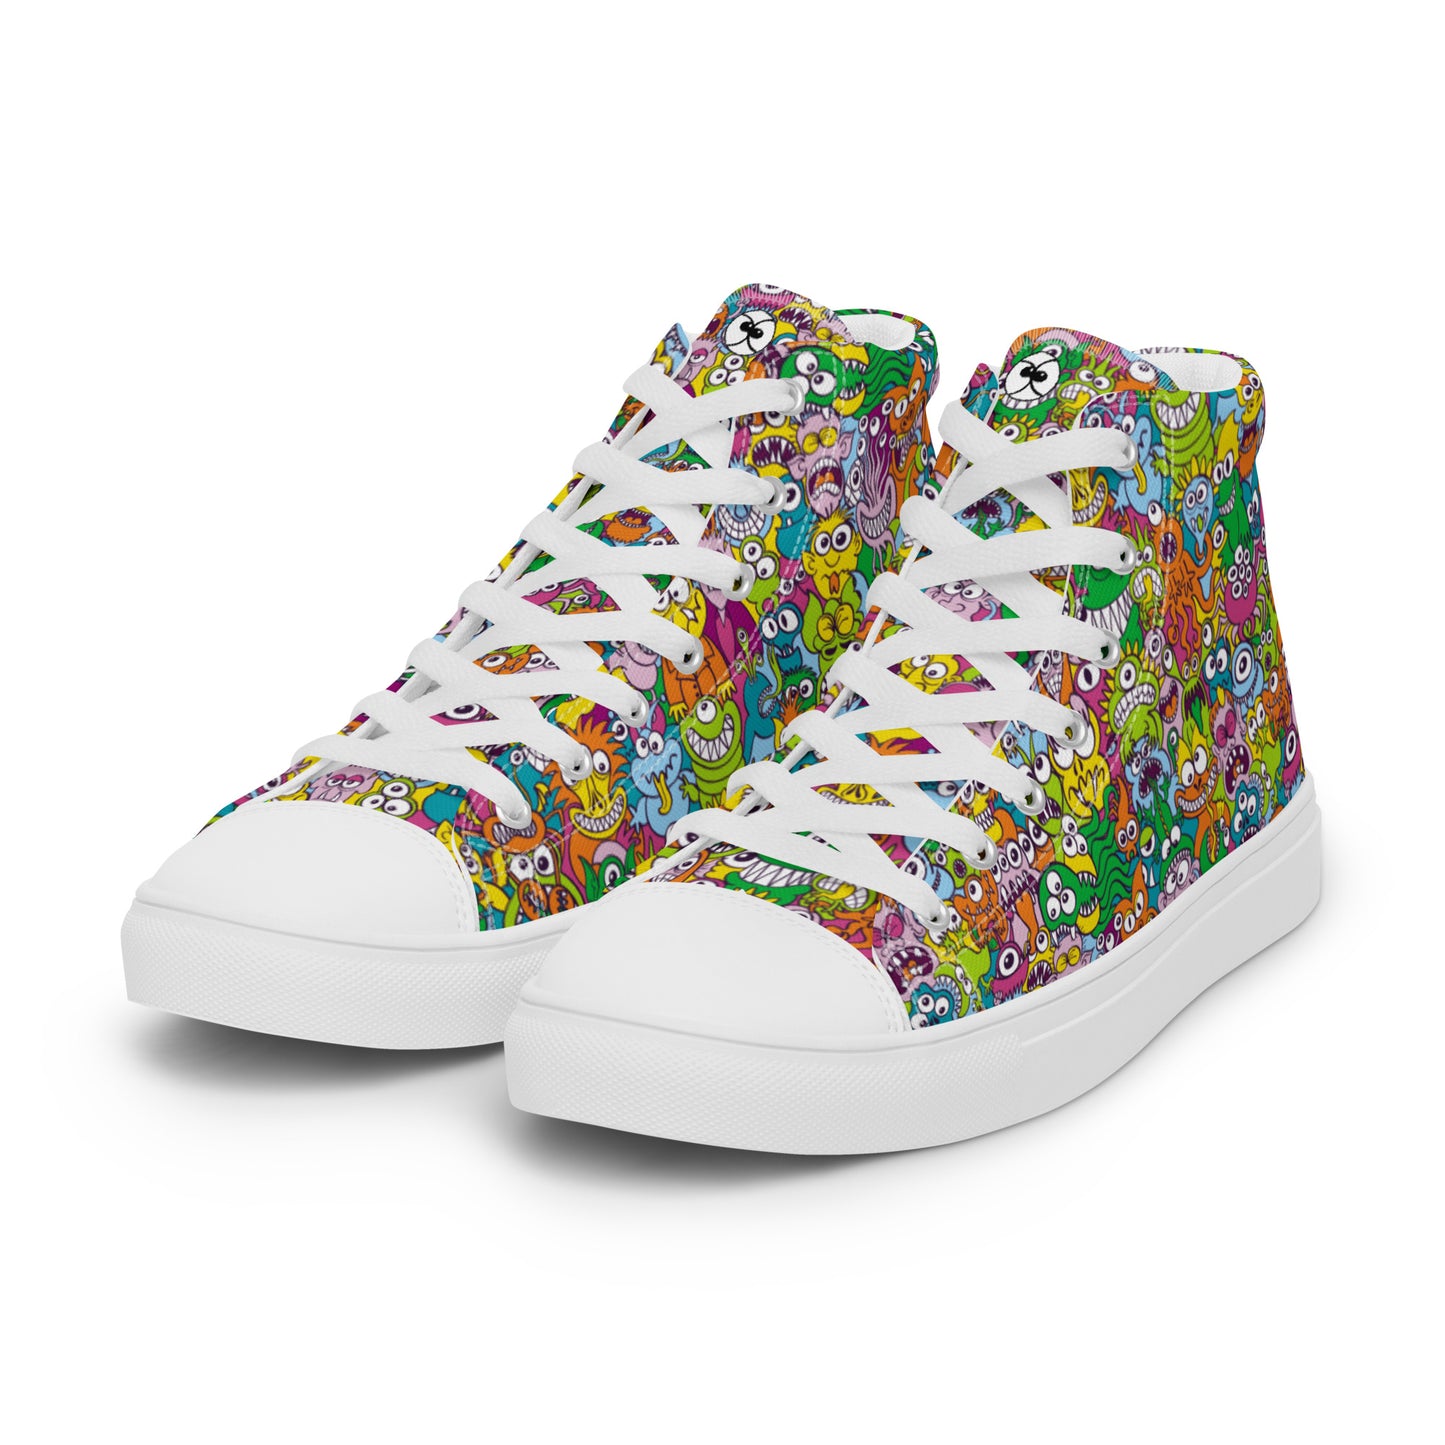 Terrific Halloween creatures ready for a horror movie Men’s high top canvas shoes. Overview